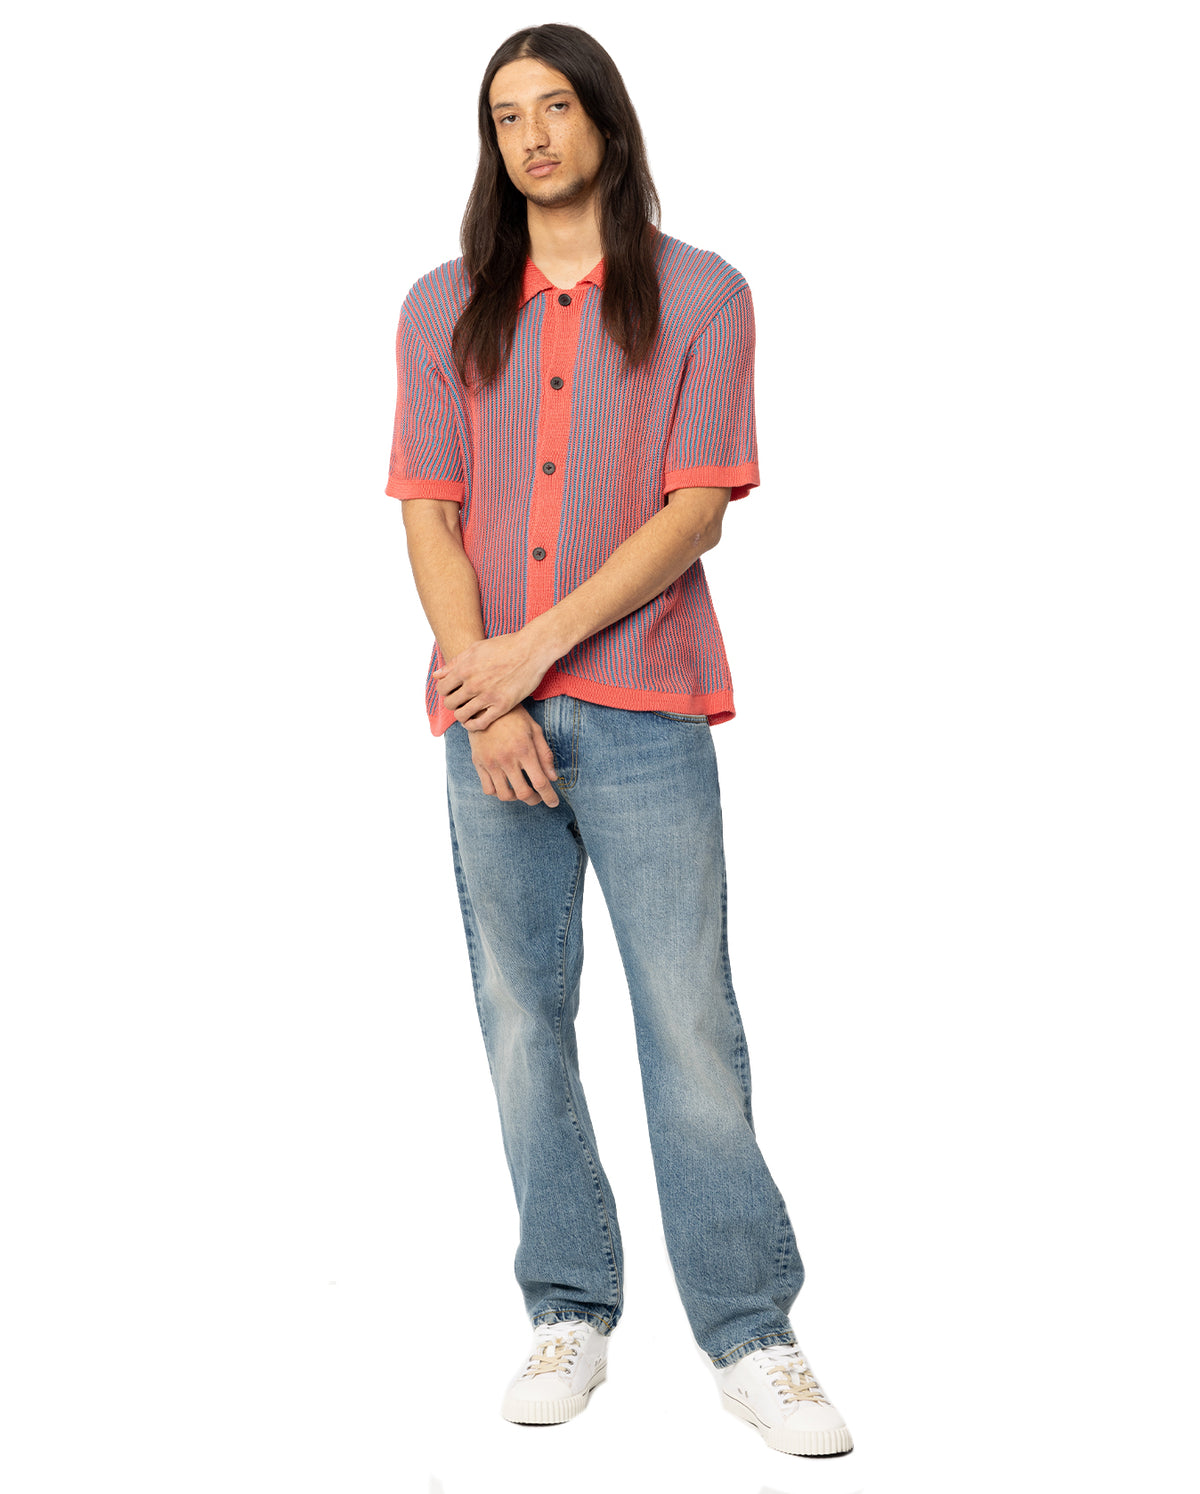 Plated Rib Knit Button Up Short Sleeve Shirt - Pink